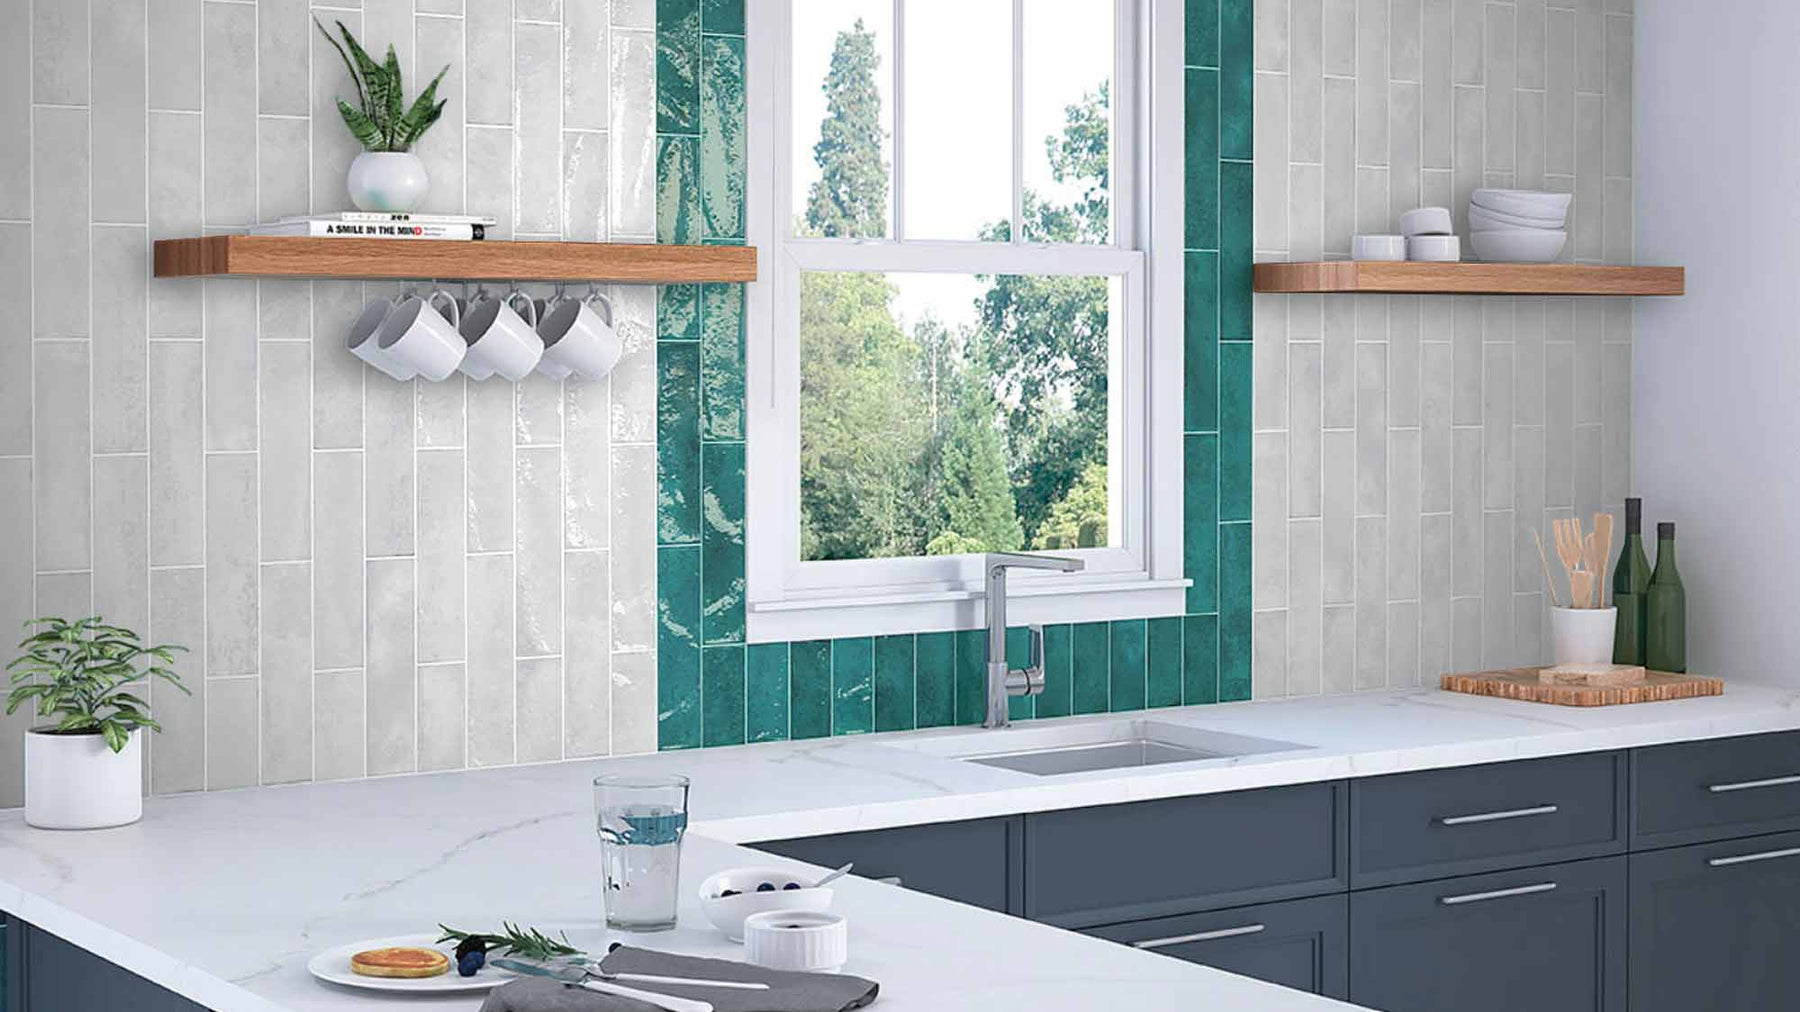 kitchen work top with white and green tile splash back walls